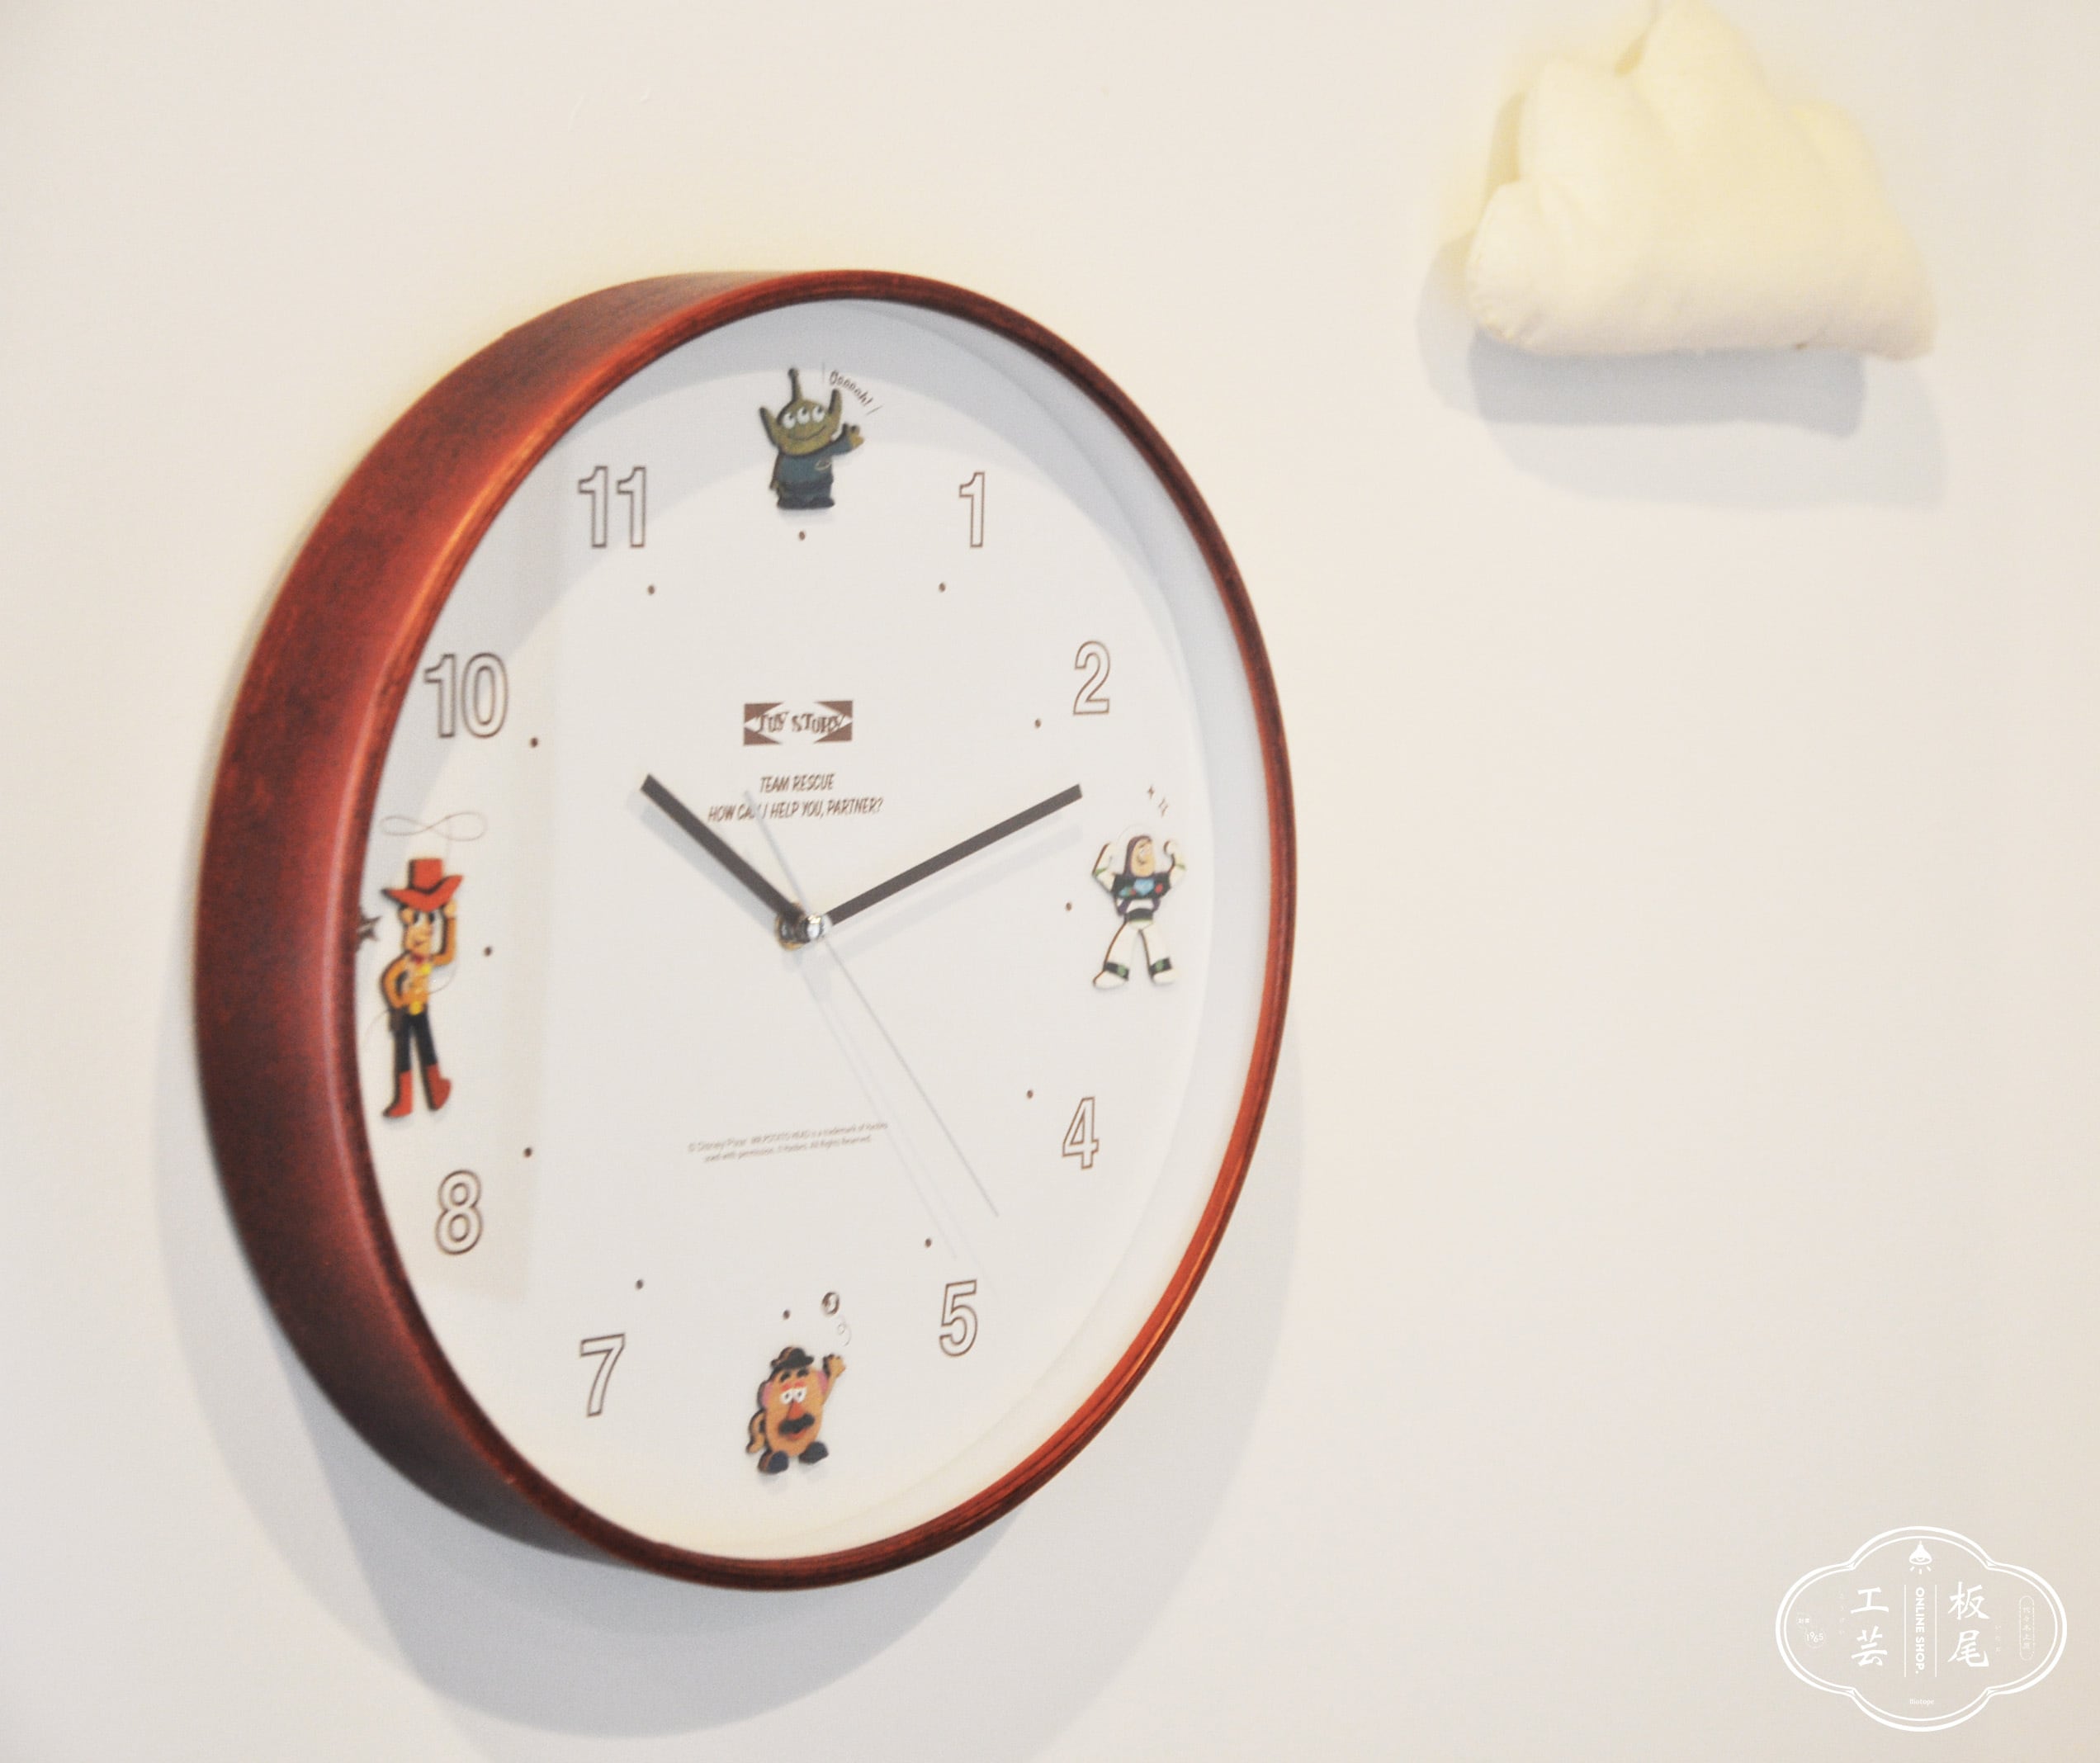 DISNEY wood parts clock TOY STORY.　　ディズニー　掛け時計　トイストーリー　　１２時までのご注文で最短翌日お届け |  板尾工芸online shop. -biotope- powered by BASE